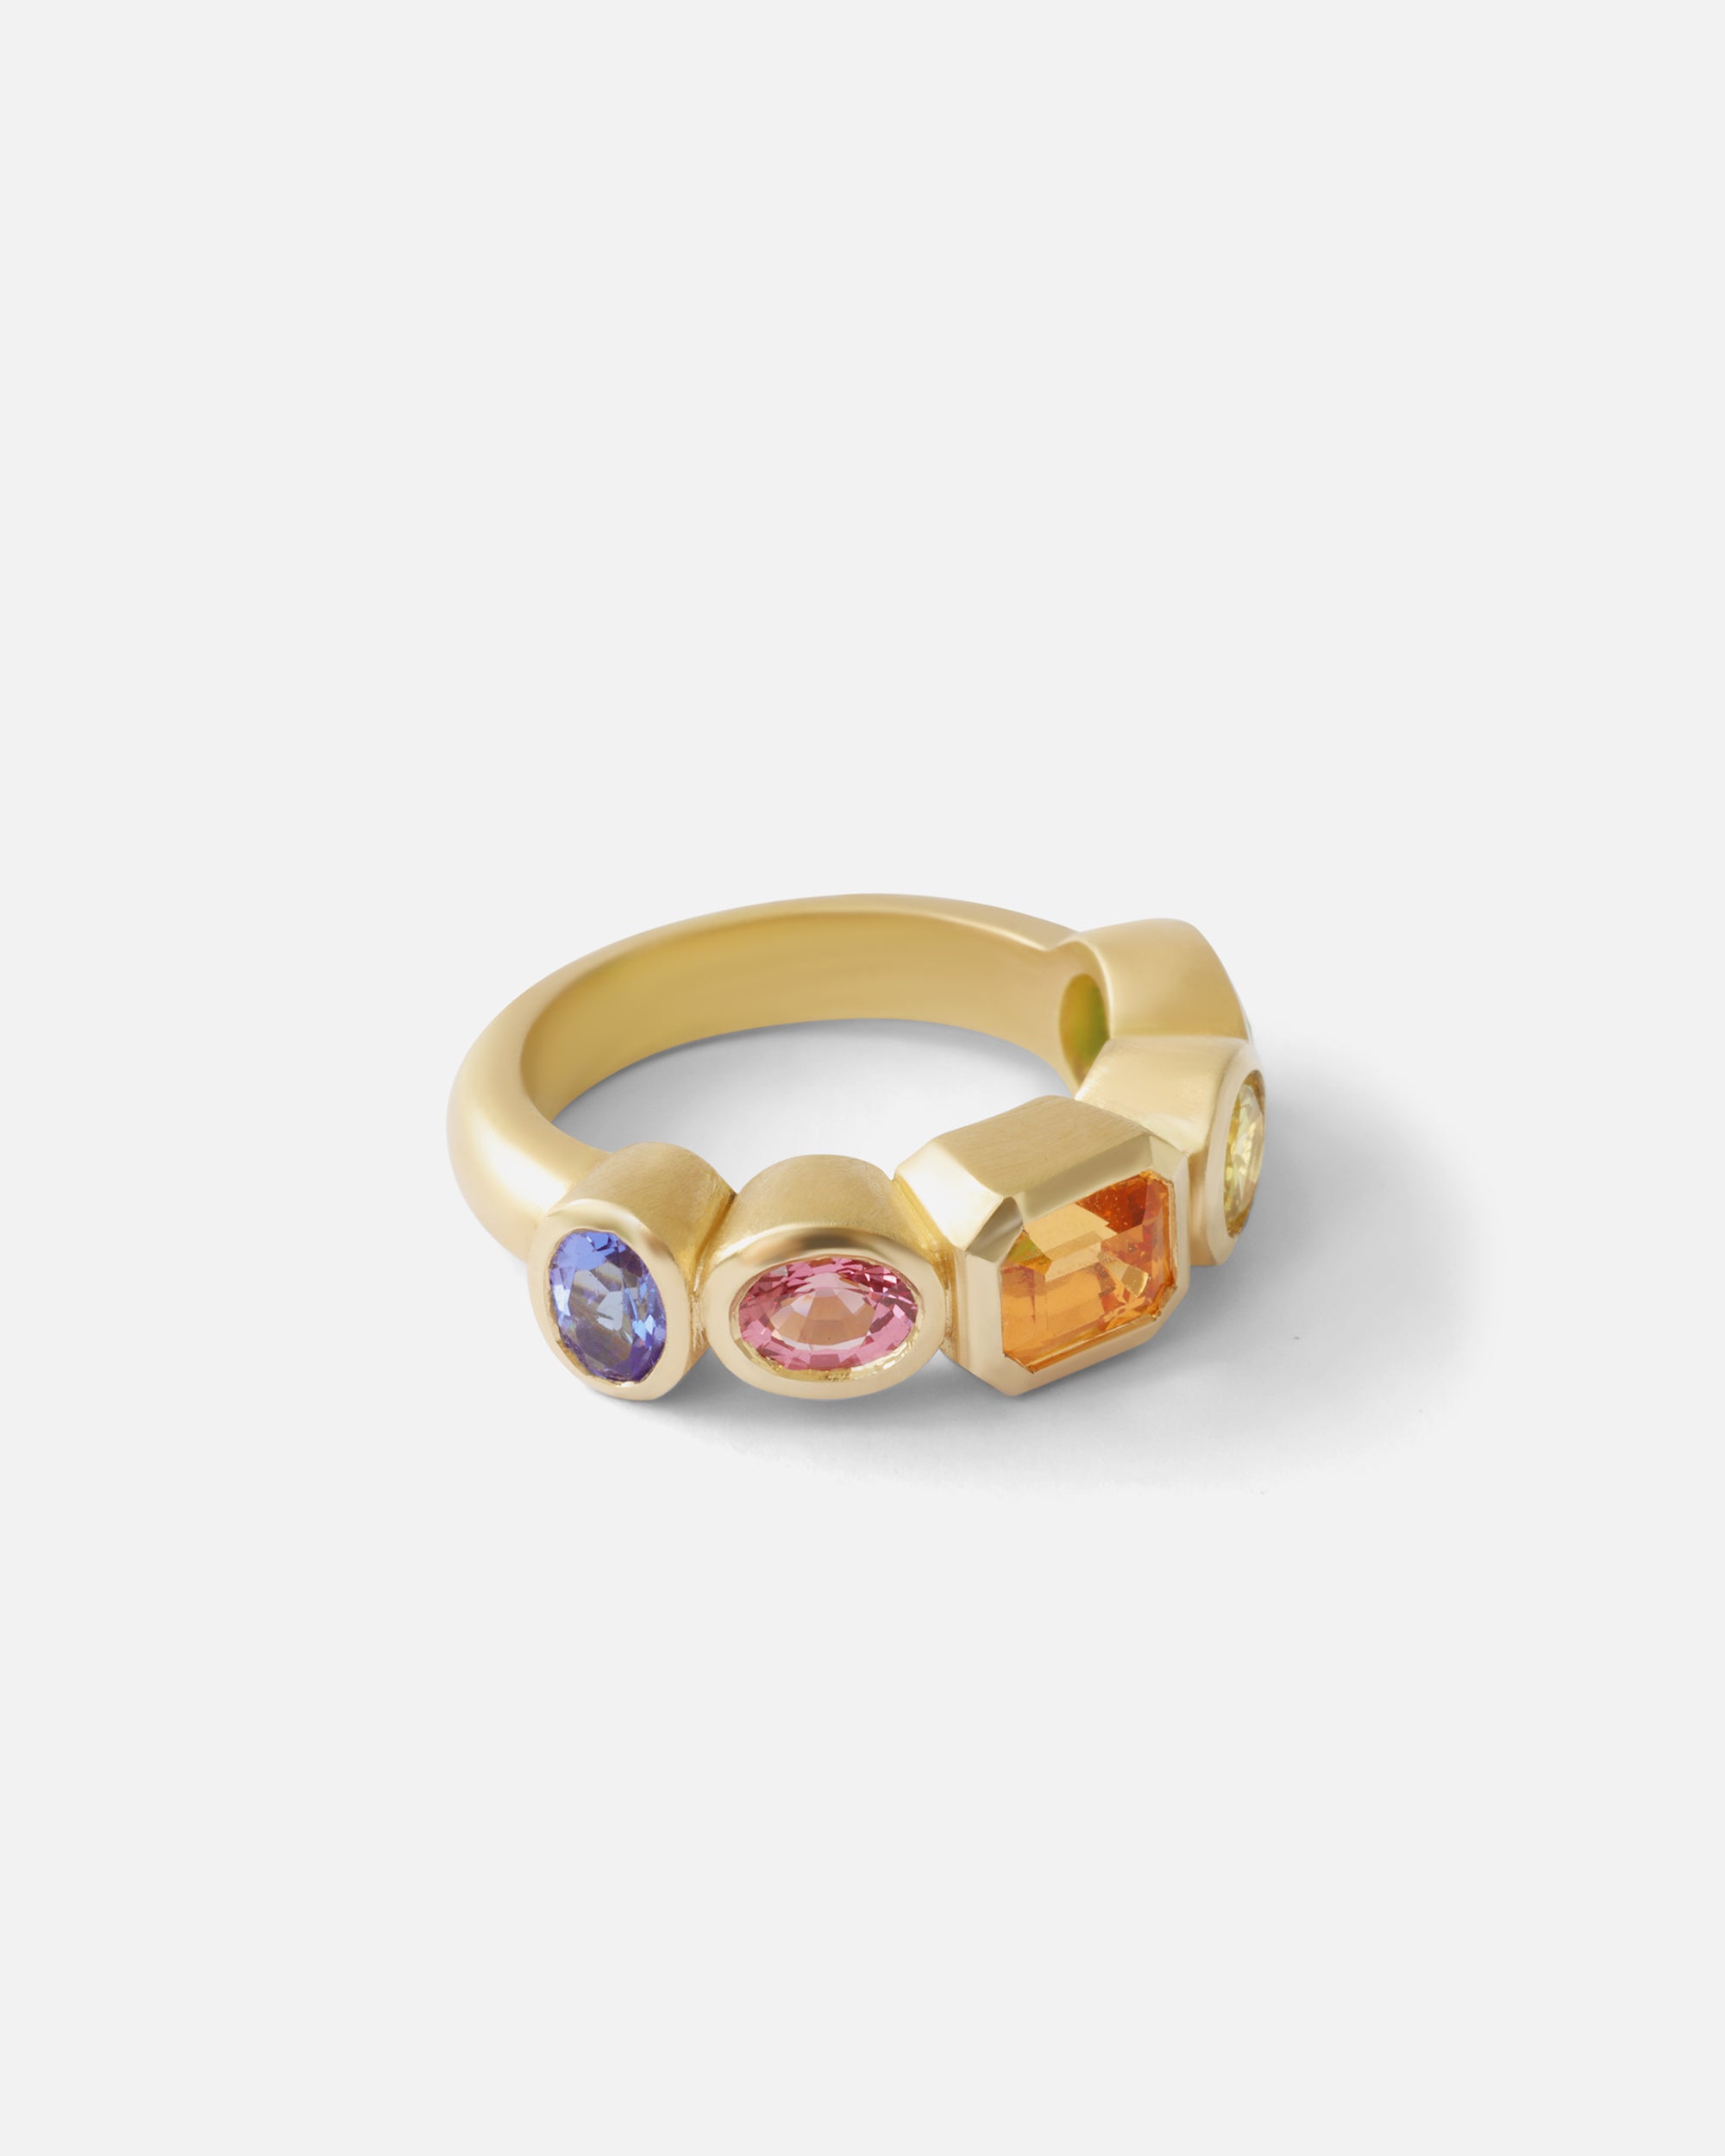 5 Stone Candy Ring By Bree Altman